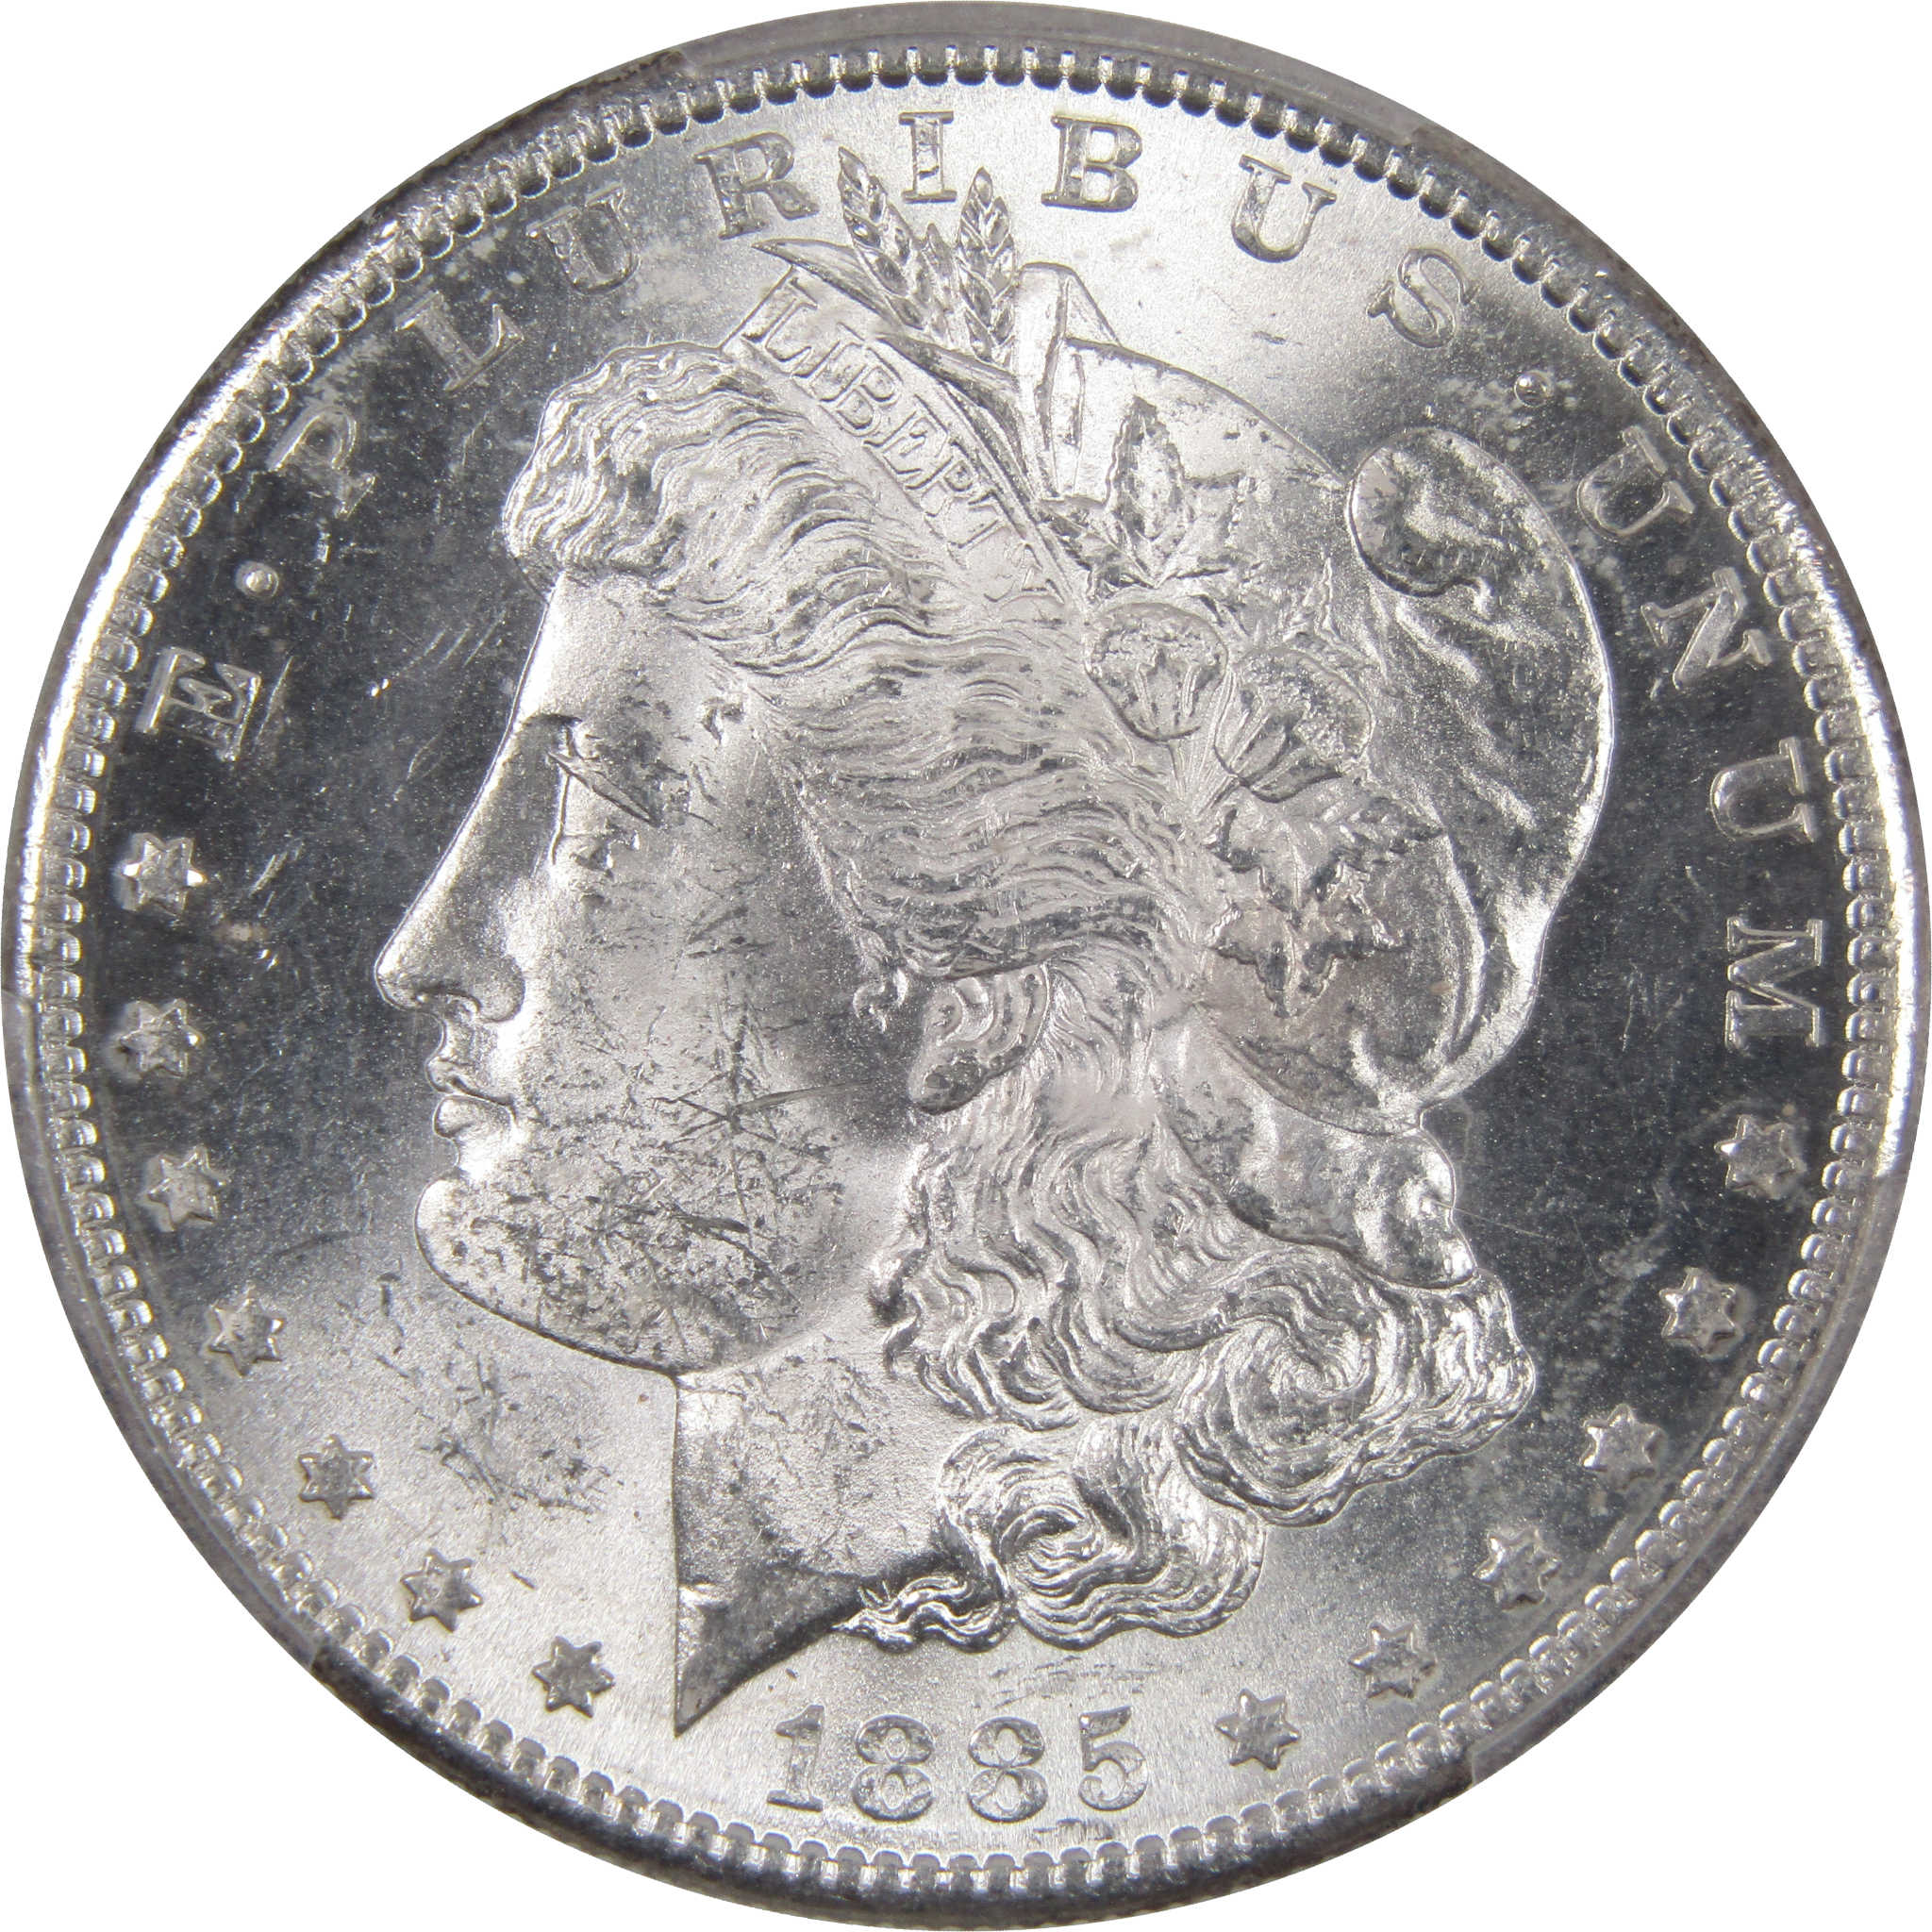 1885 S Morgan Dollar MS 63 PCGS 90% Silver Uncirculated SKU:I3046 - Morgan coin - Morgan silver dollar - Morgan silver dollar for sale - Profile Coins &amp; Collectibles